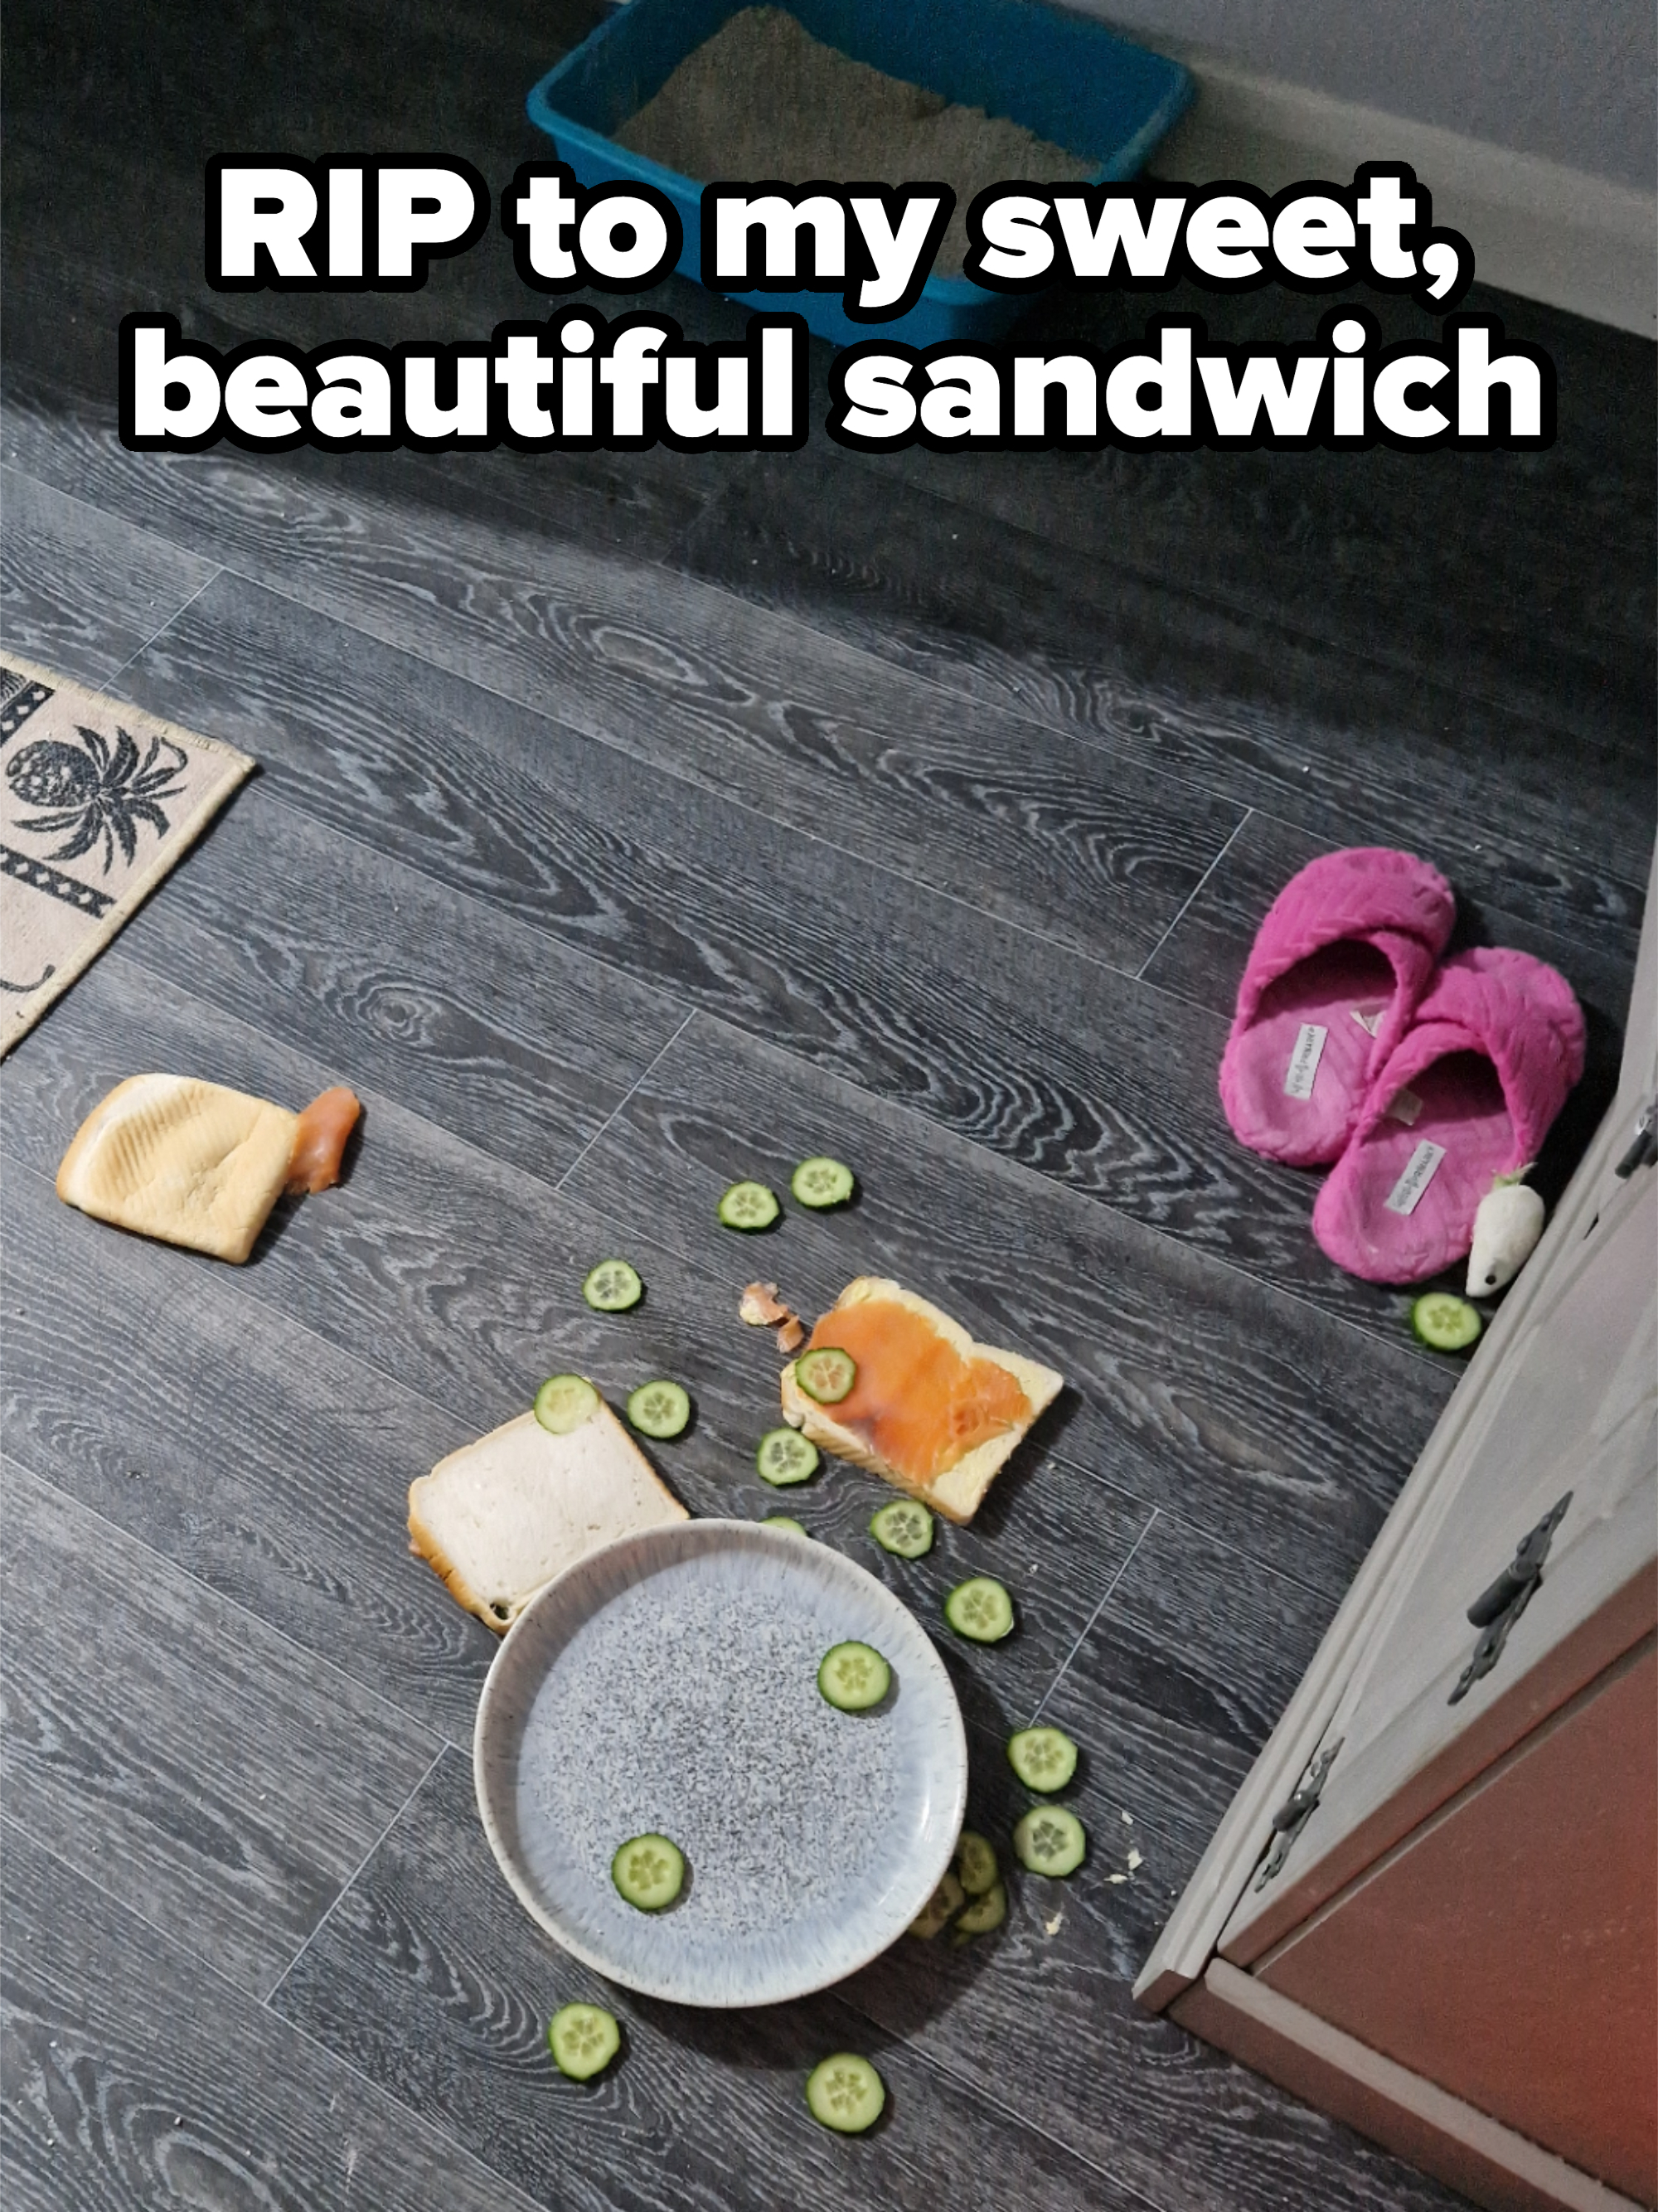 A messy floor with a fallen sandwich, scattered cucumber slices, a cat litter box, and pink slippers